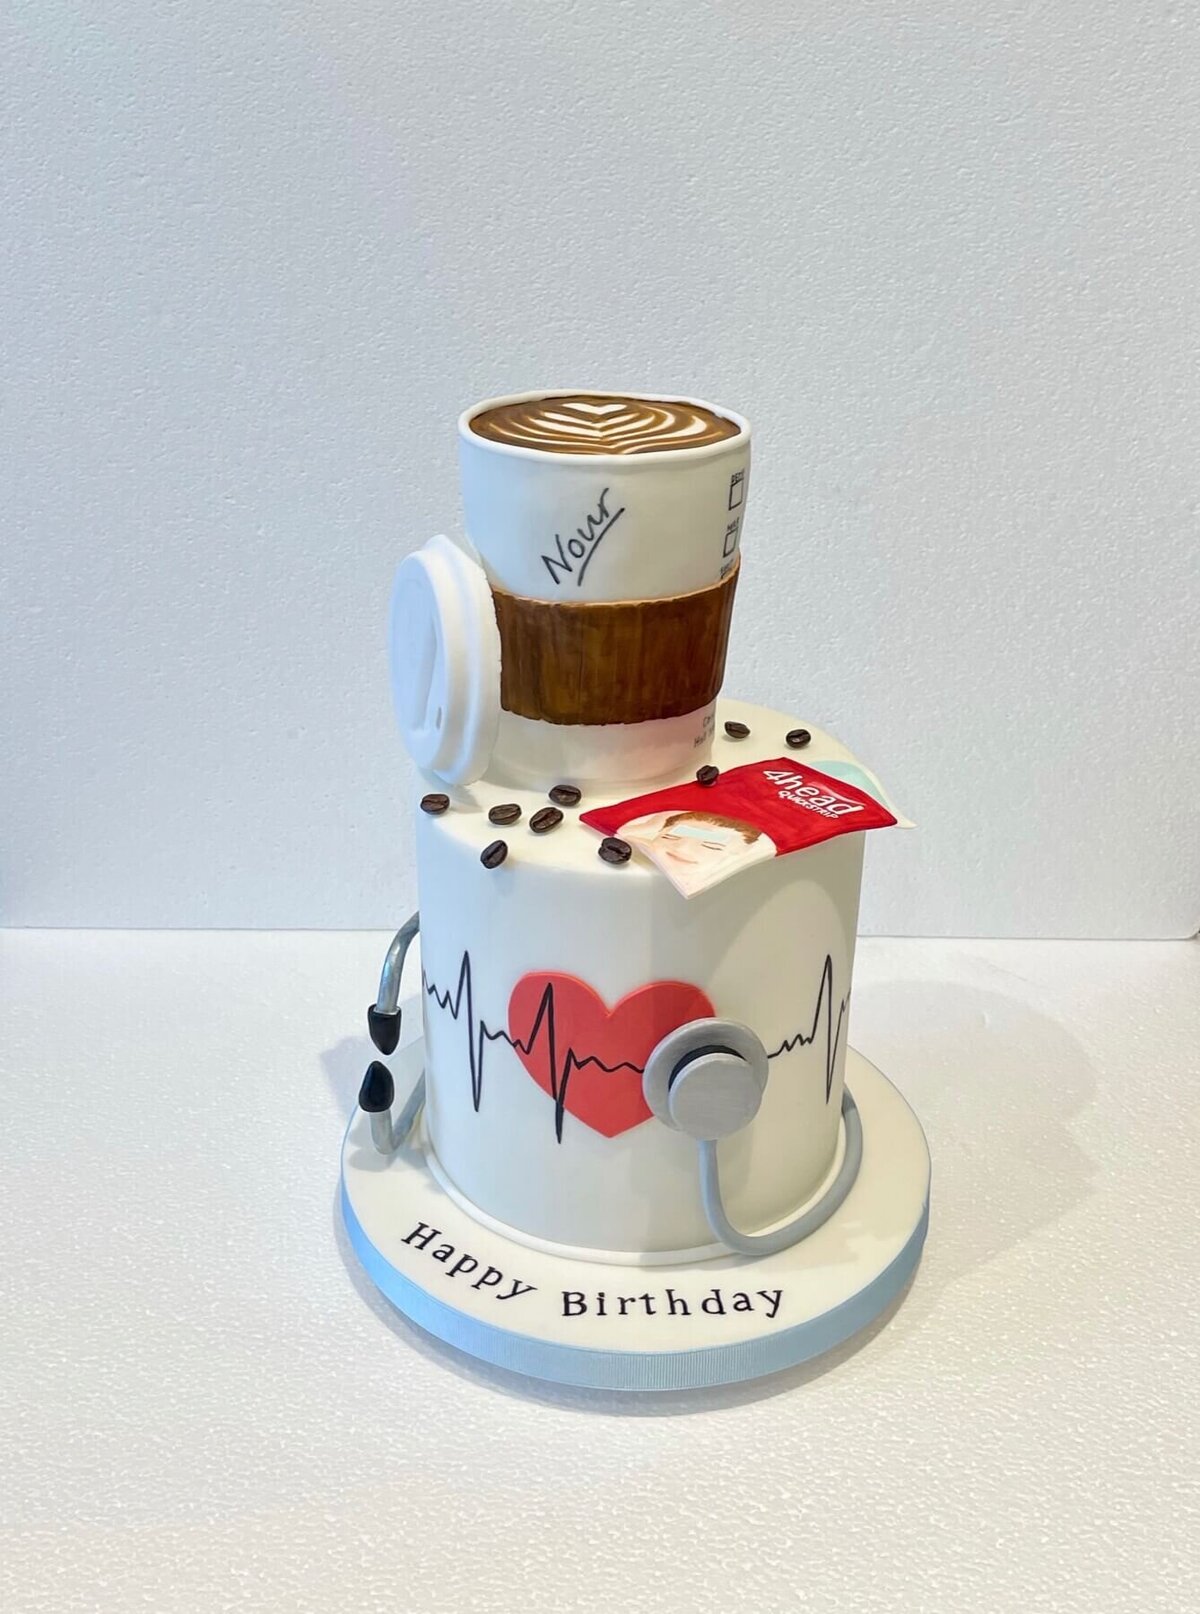 A medical themed two tier cake where the bottom tier shows a heart beat and stethoscope and the top tier is a cup of coffee with spilt coffee beans